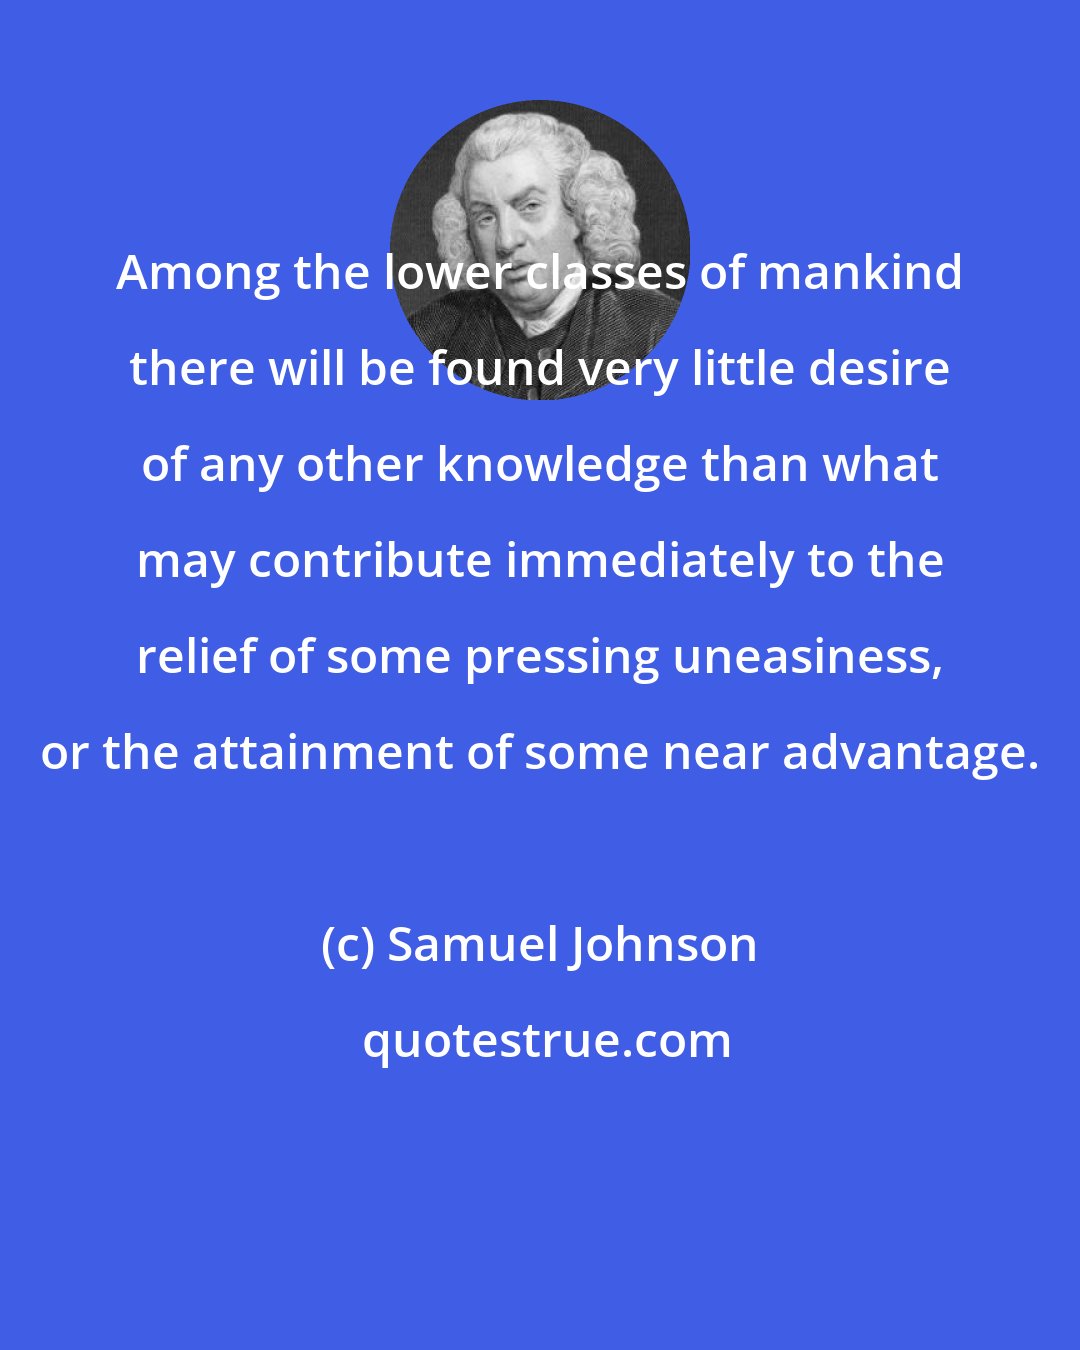 Samuel Johnson: Among the lower classes of mankind there will be found very little desire of any other knowledge than what may contribute immediately to the relief of some pressing uneasiness, or the attainment of some near advantage.